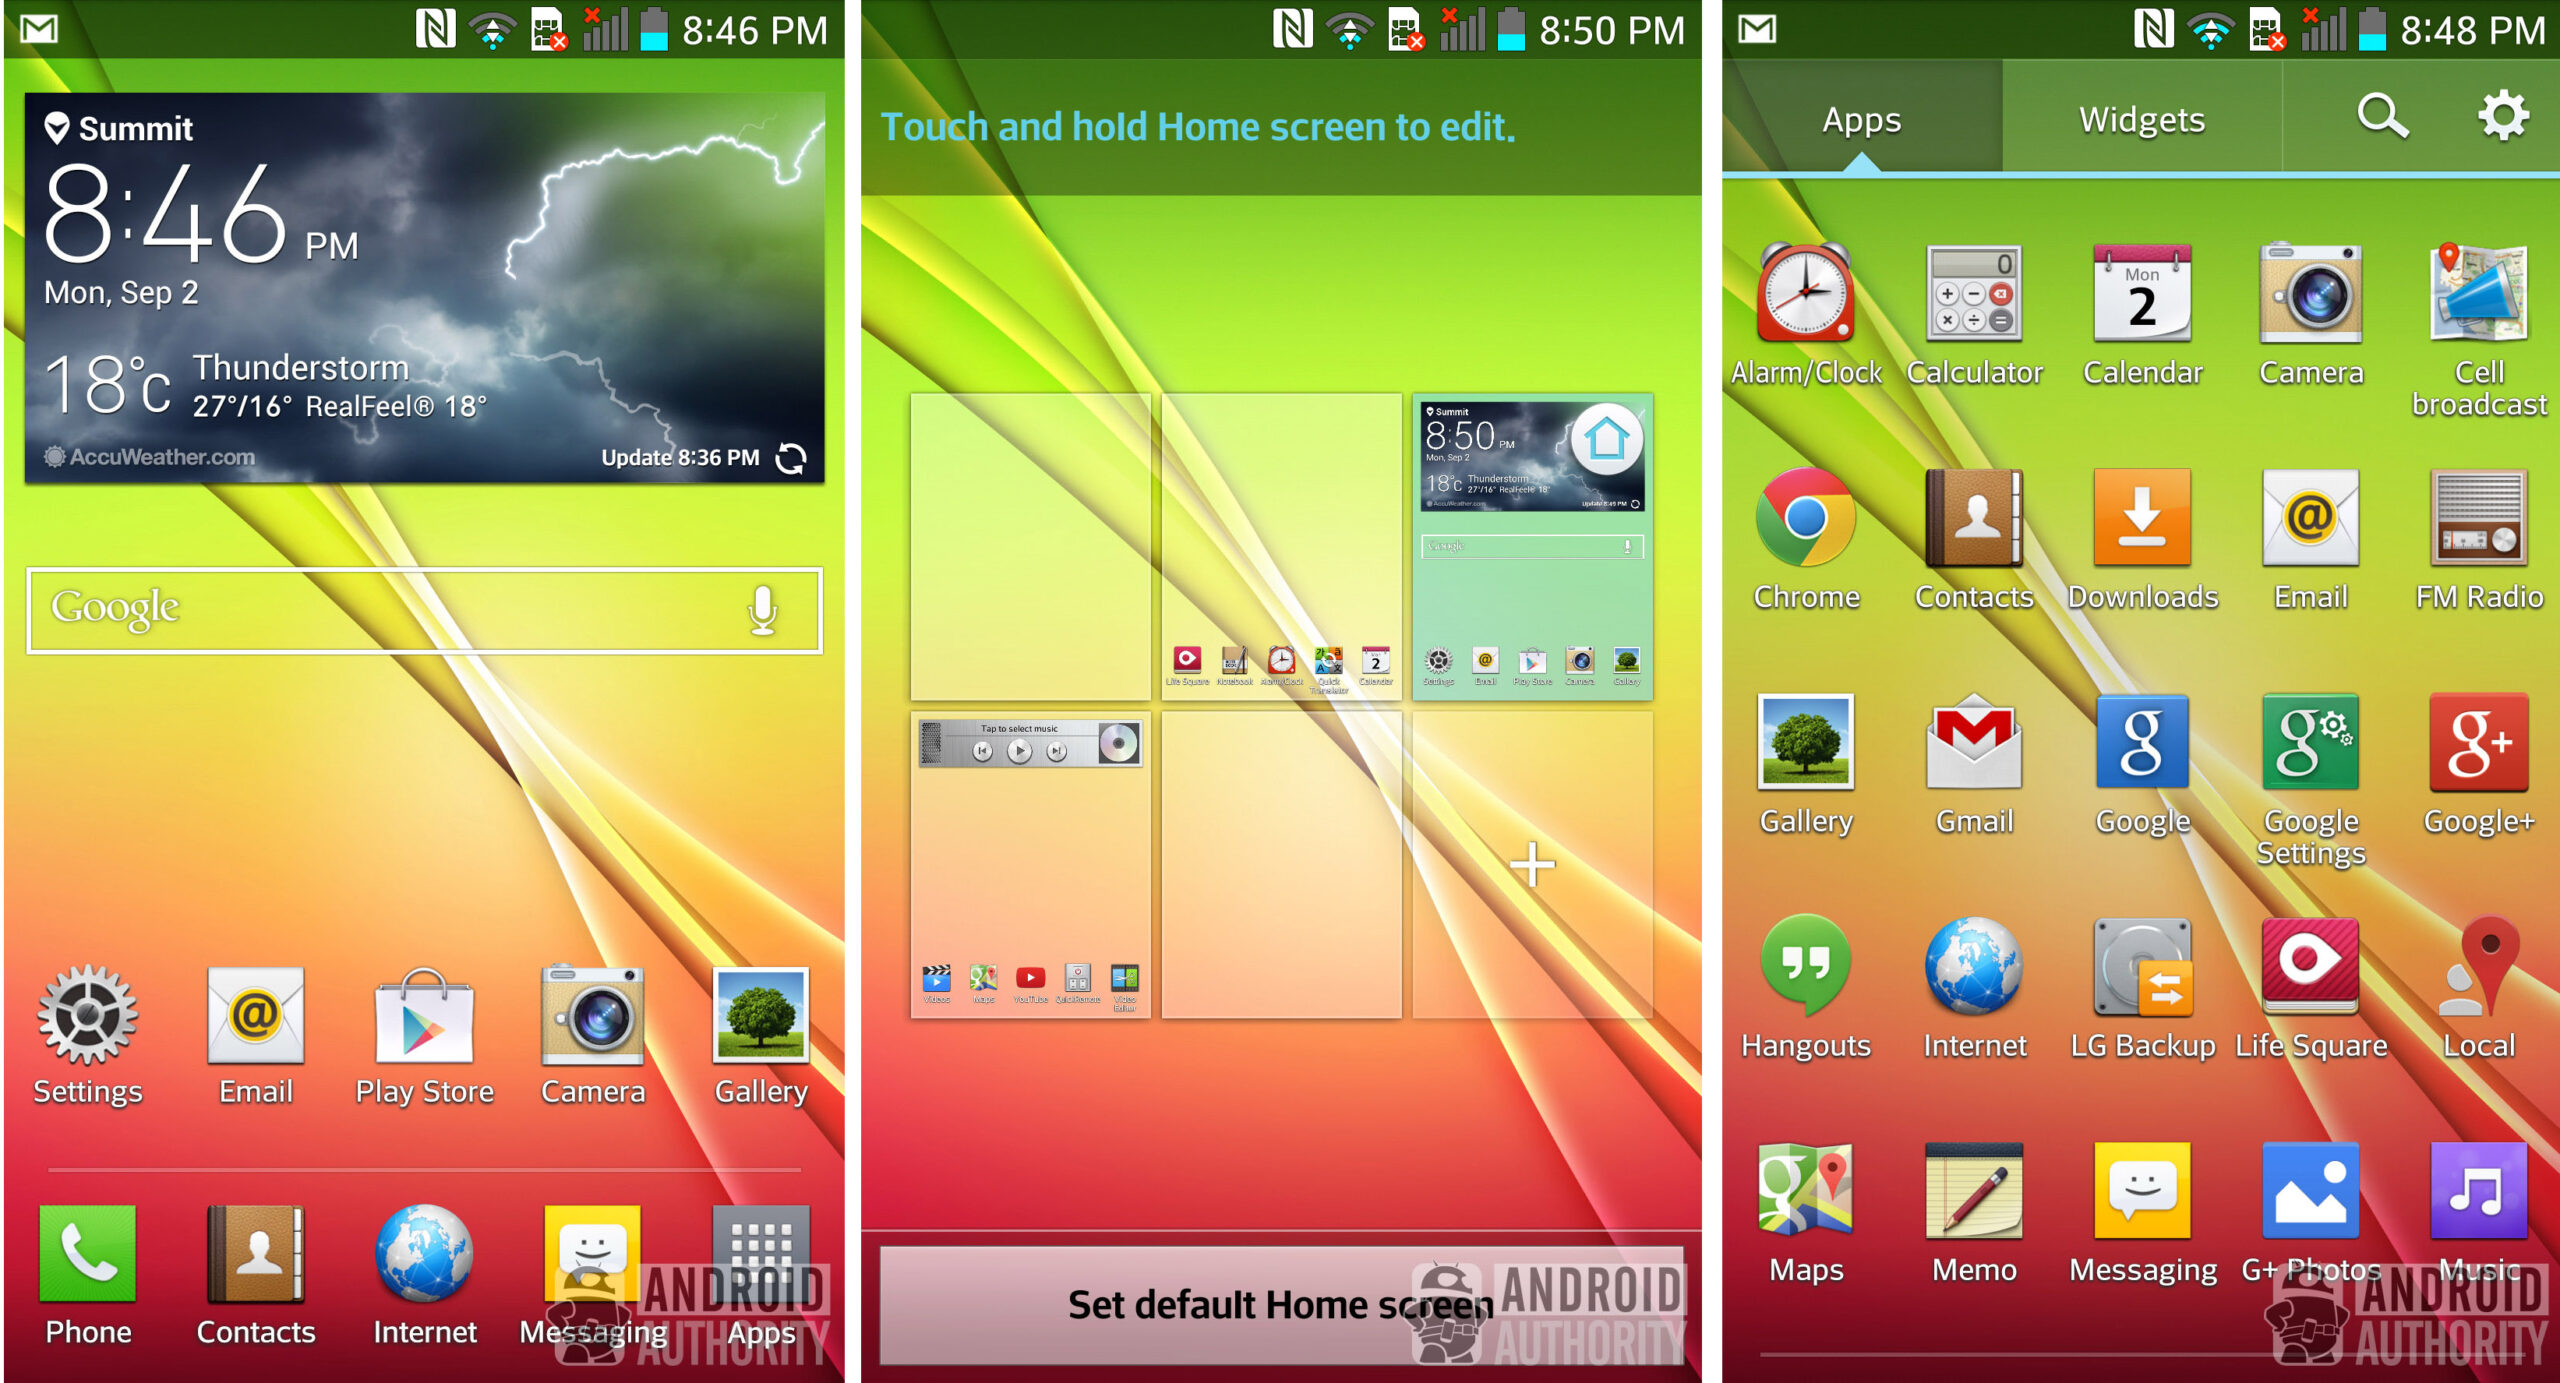 LG's UI has come a long way, and is one of the most customizable out there.